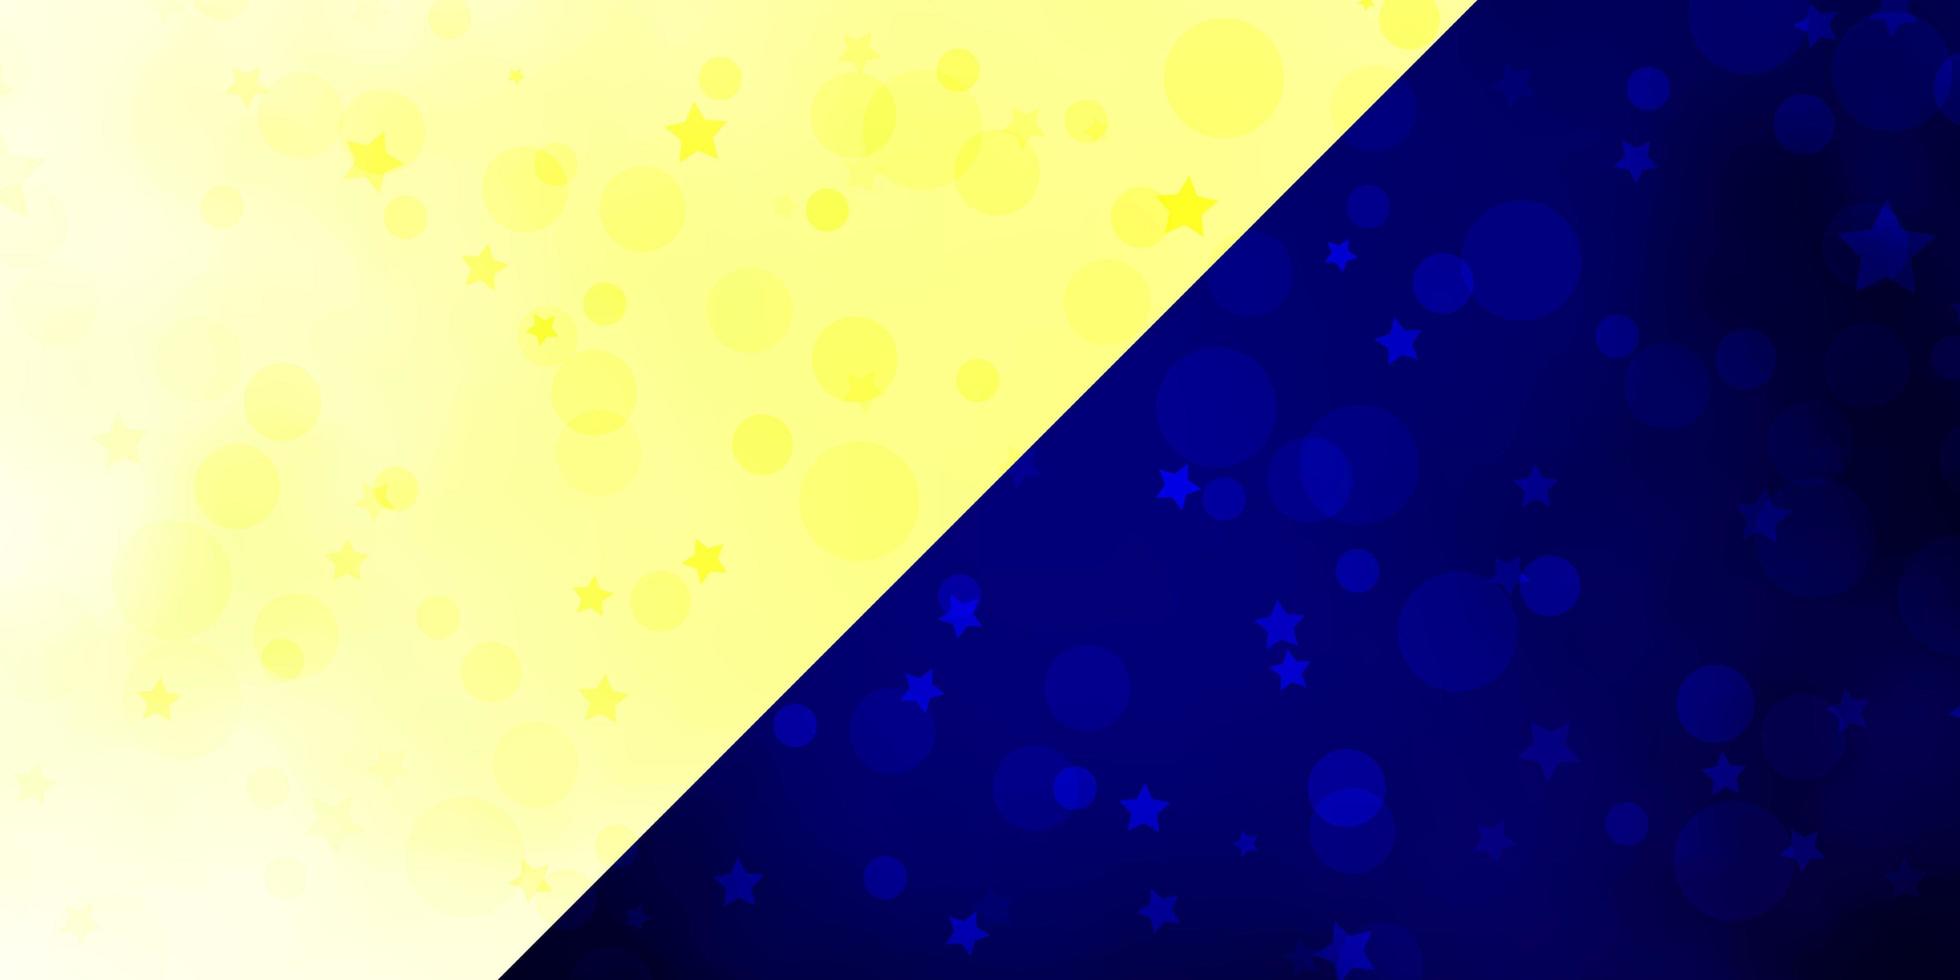 Vector texture with circles, stars. Abstract illustration with colorful spots, stars. Pattern for design of fabric, wallpapers.